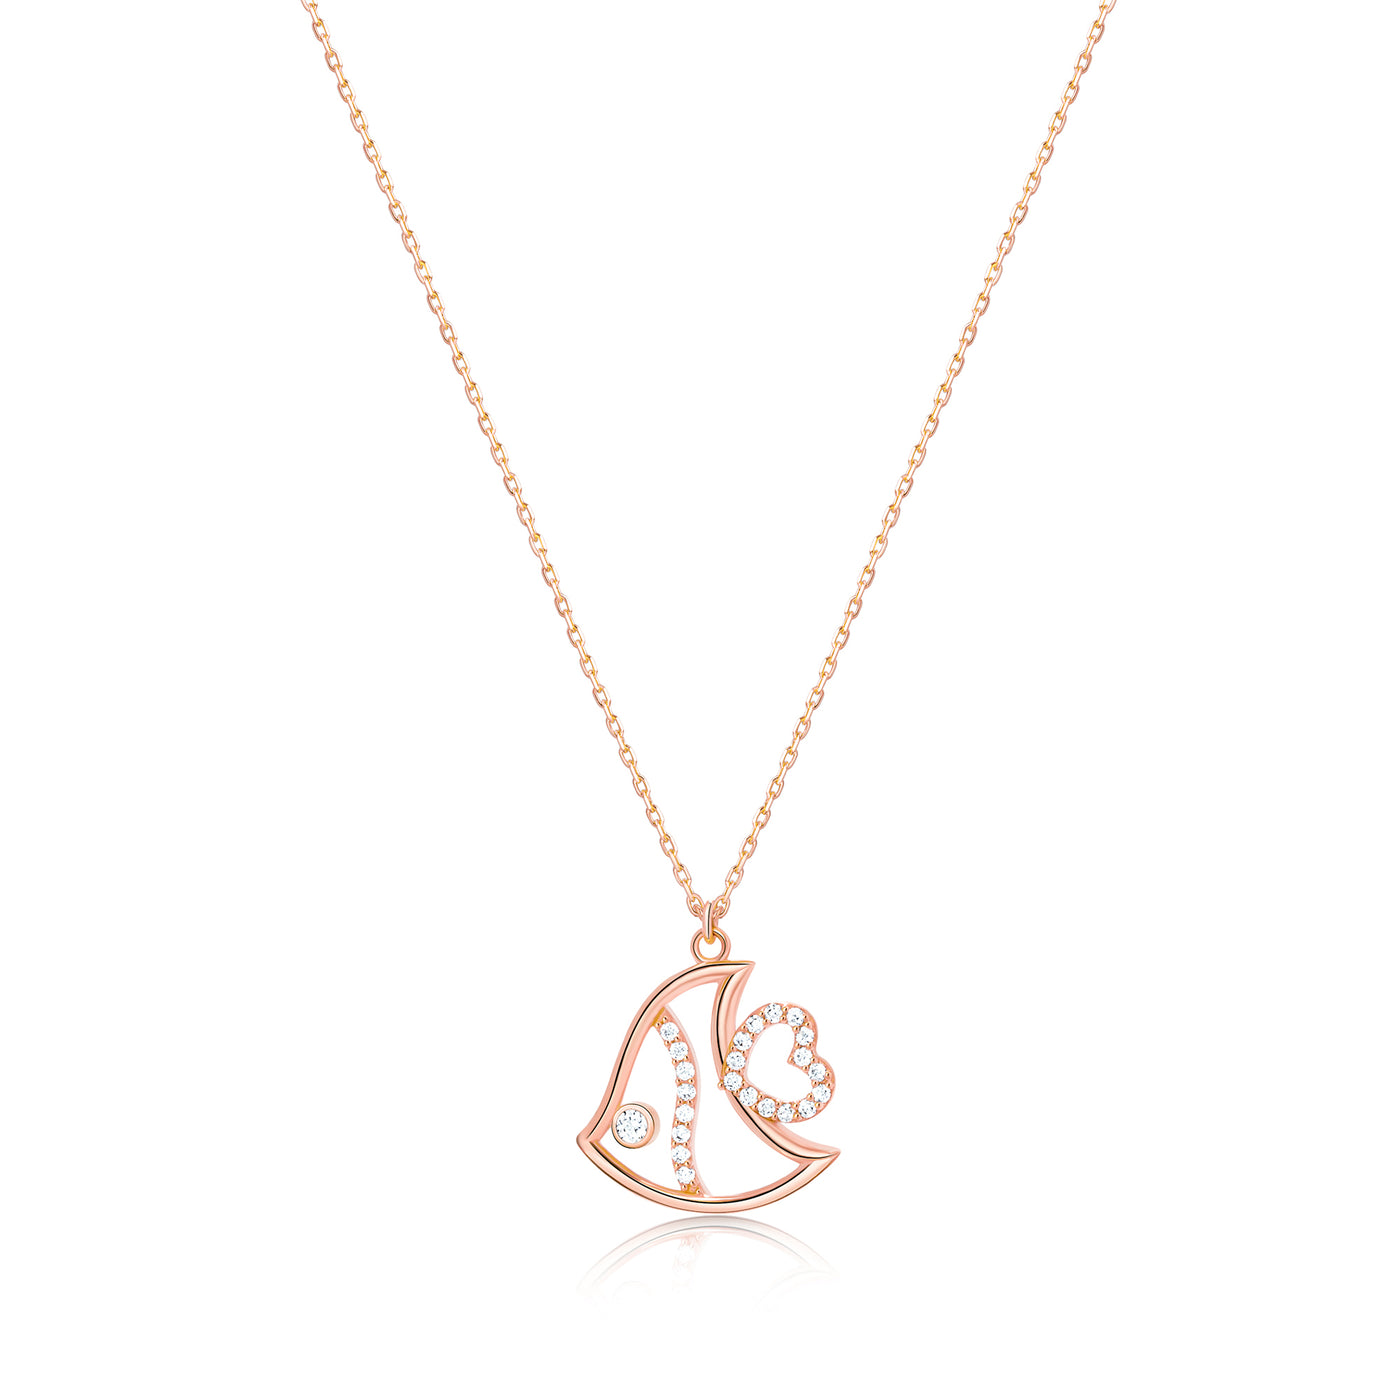 Fish Necklace With CZ Stones 14k 8k and Silver